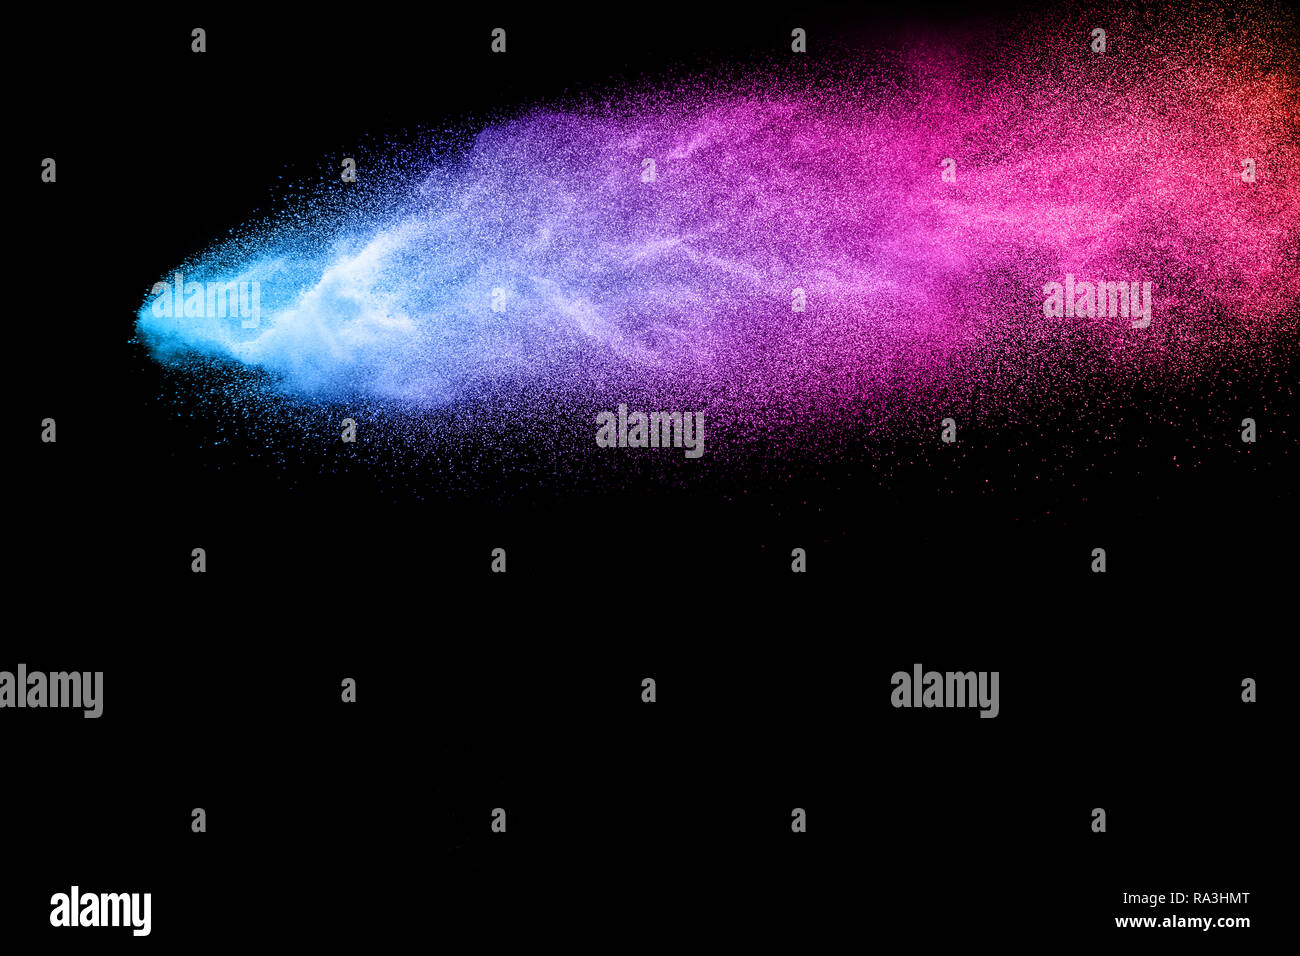 Multi Color Particles Explosion On Black Background Colorful Dust Splatter On Dark Background Stock Photo Alamy